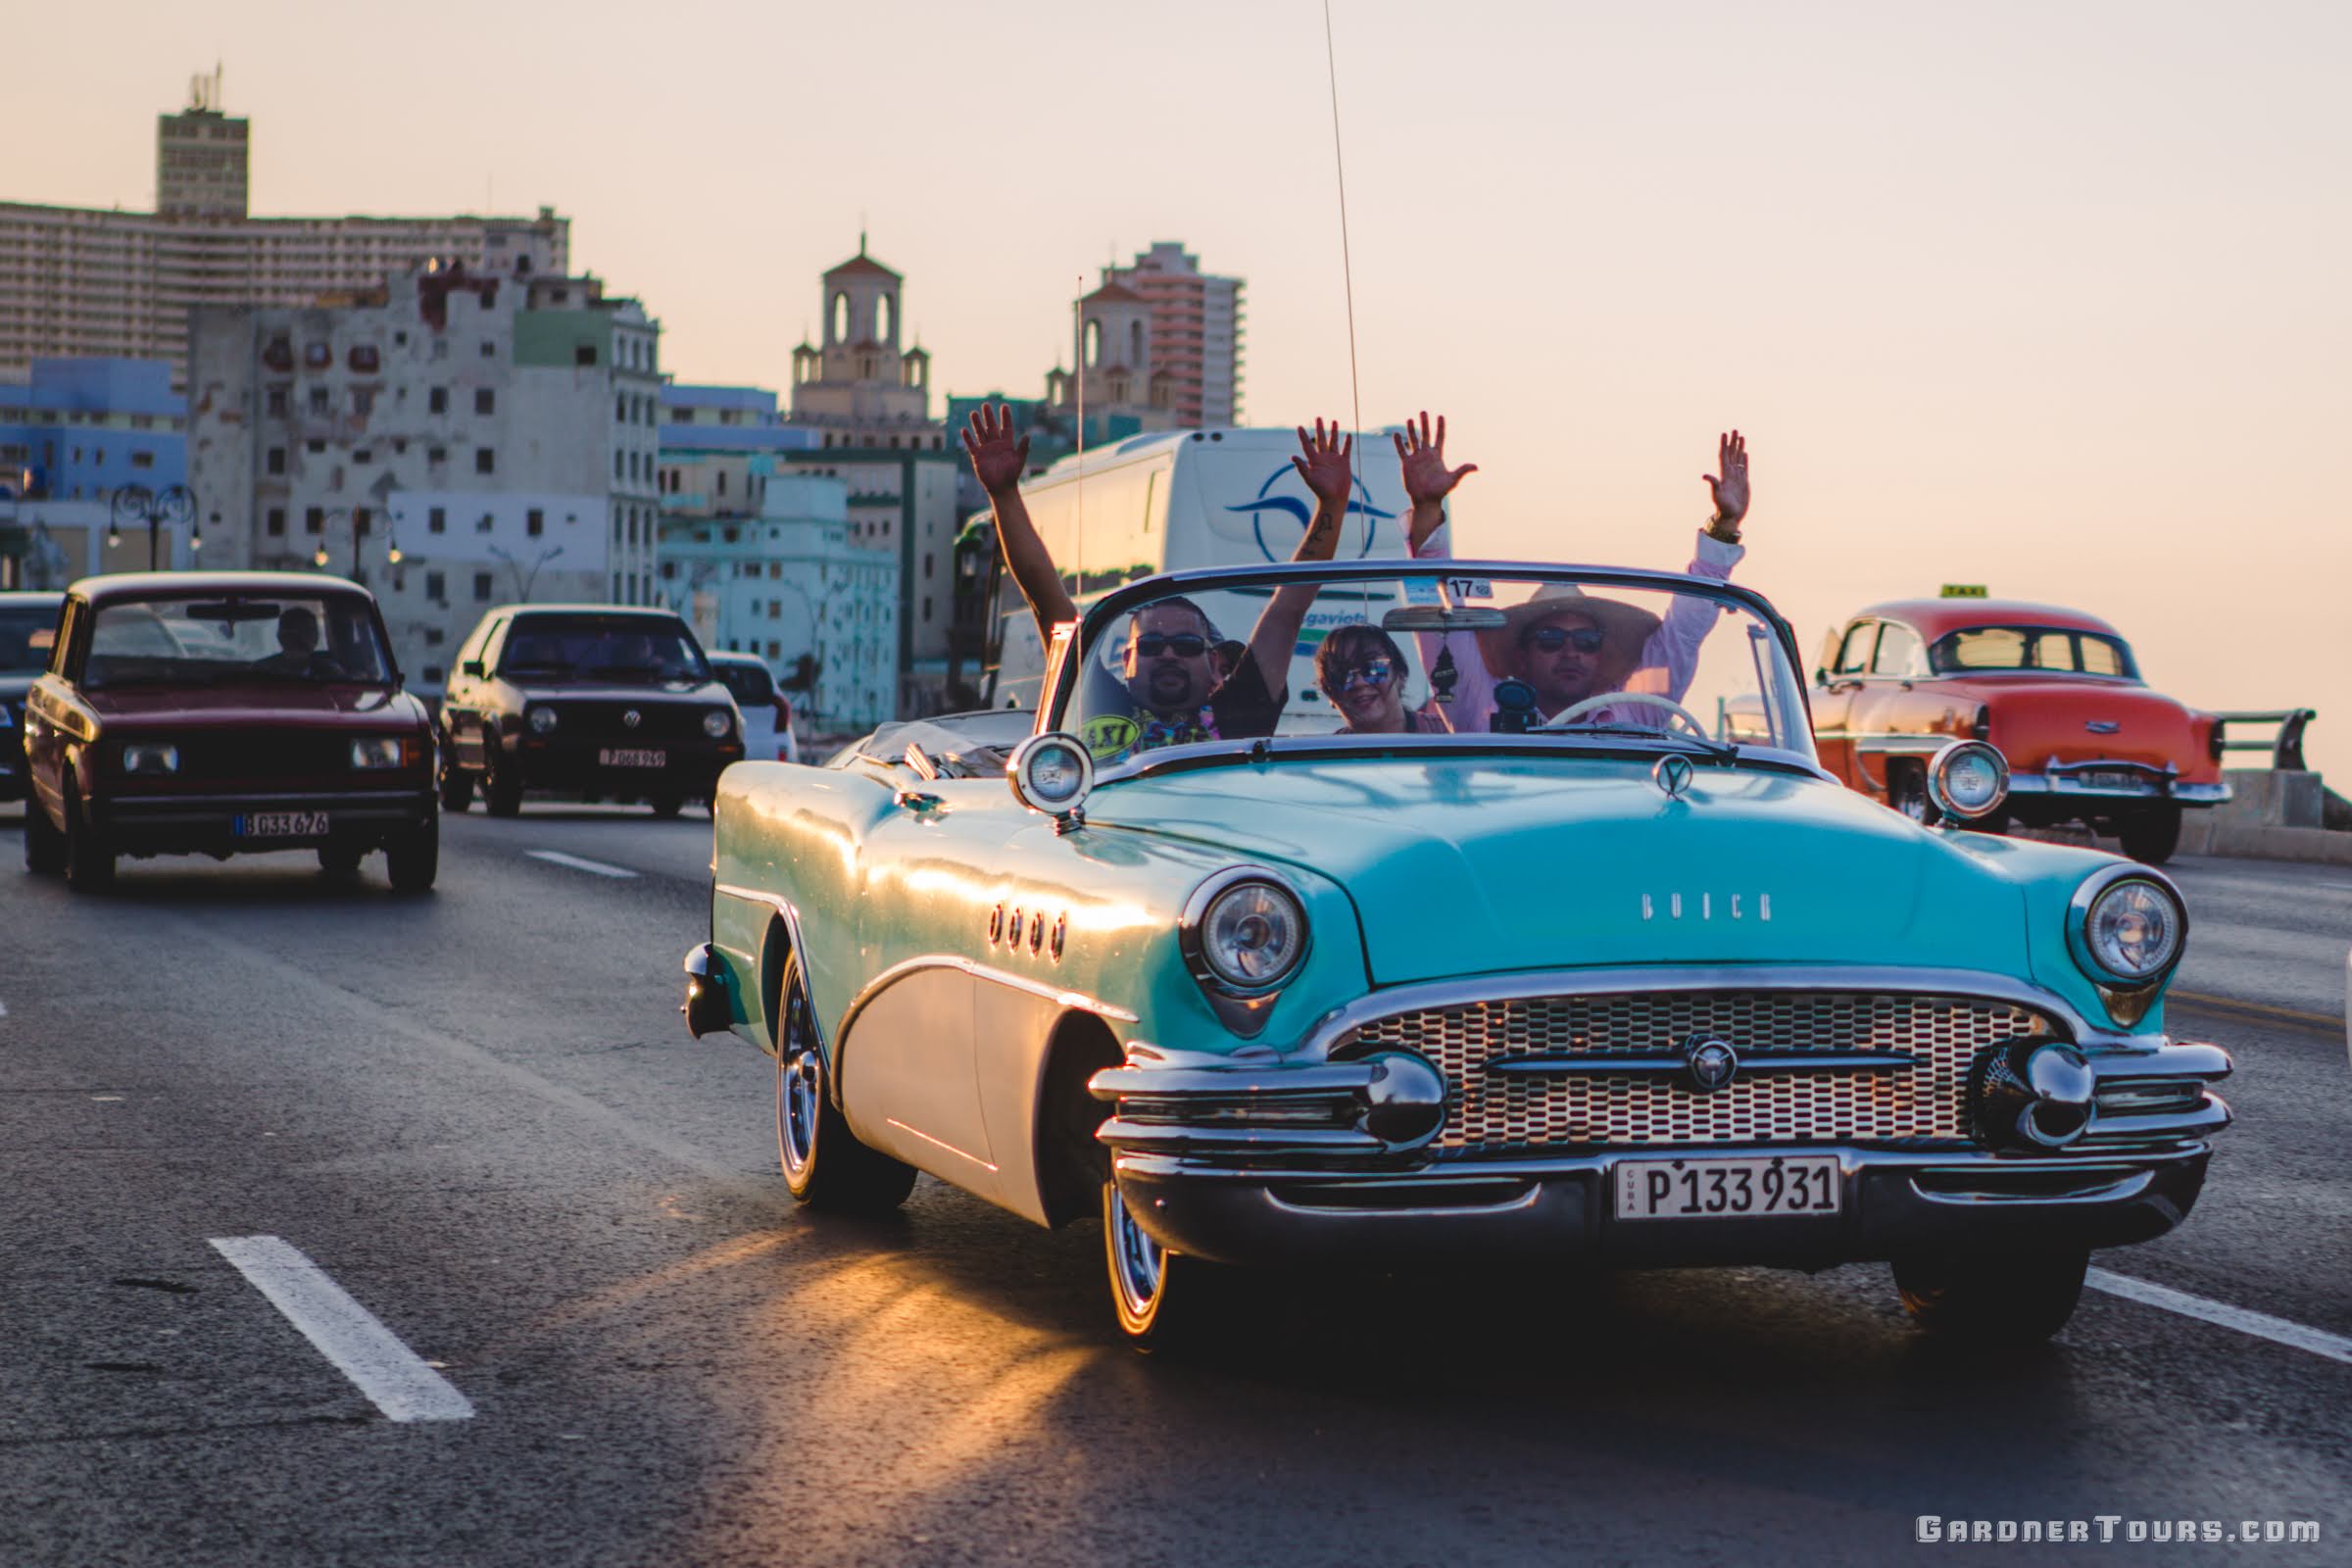 Group of Friends in Turquoise Buick Convertible Car with Hands Up on Malecon in Havana, Cuba